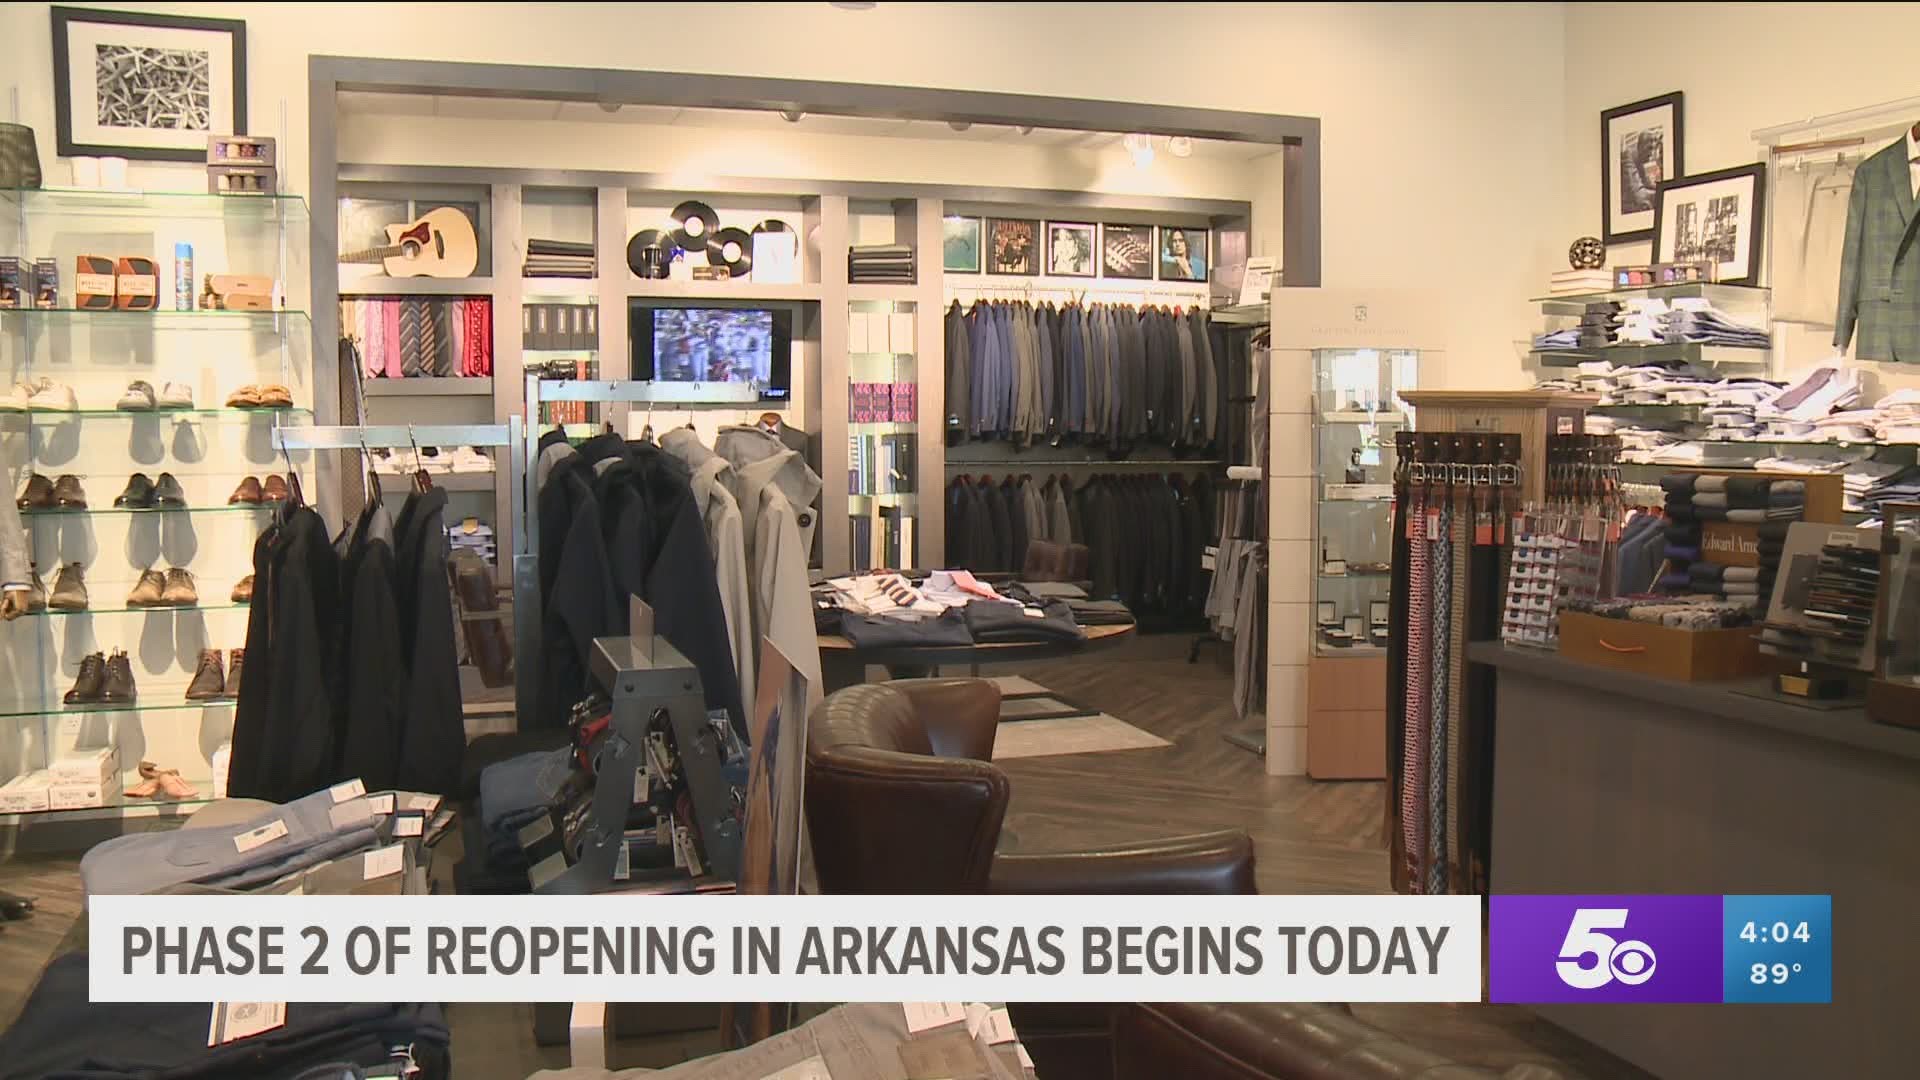 Phase 2 of reopening Arkansas begins today